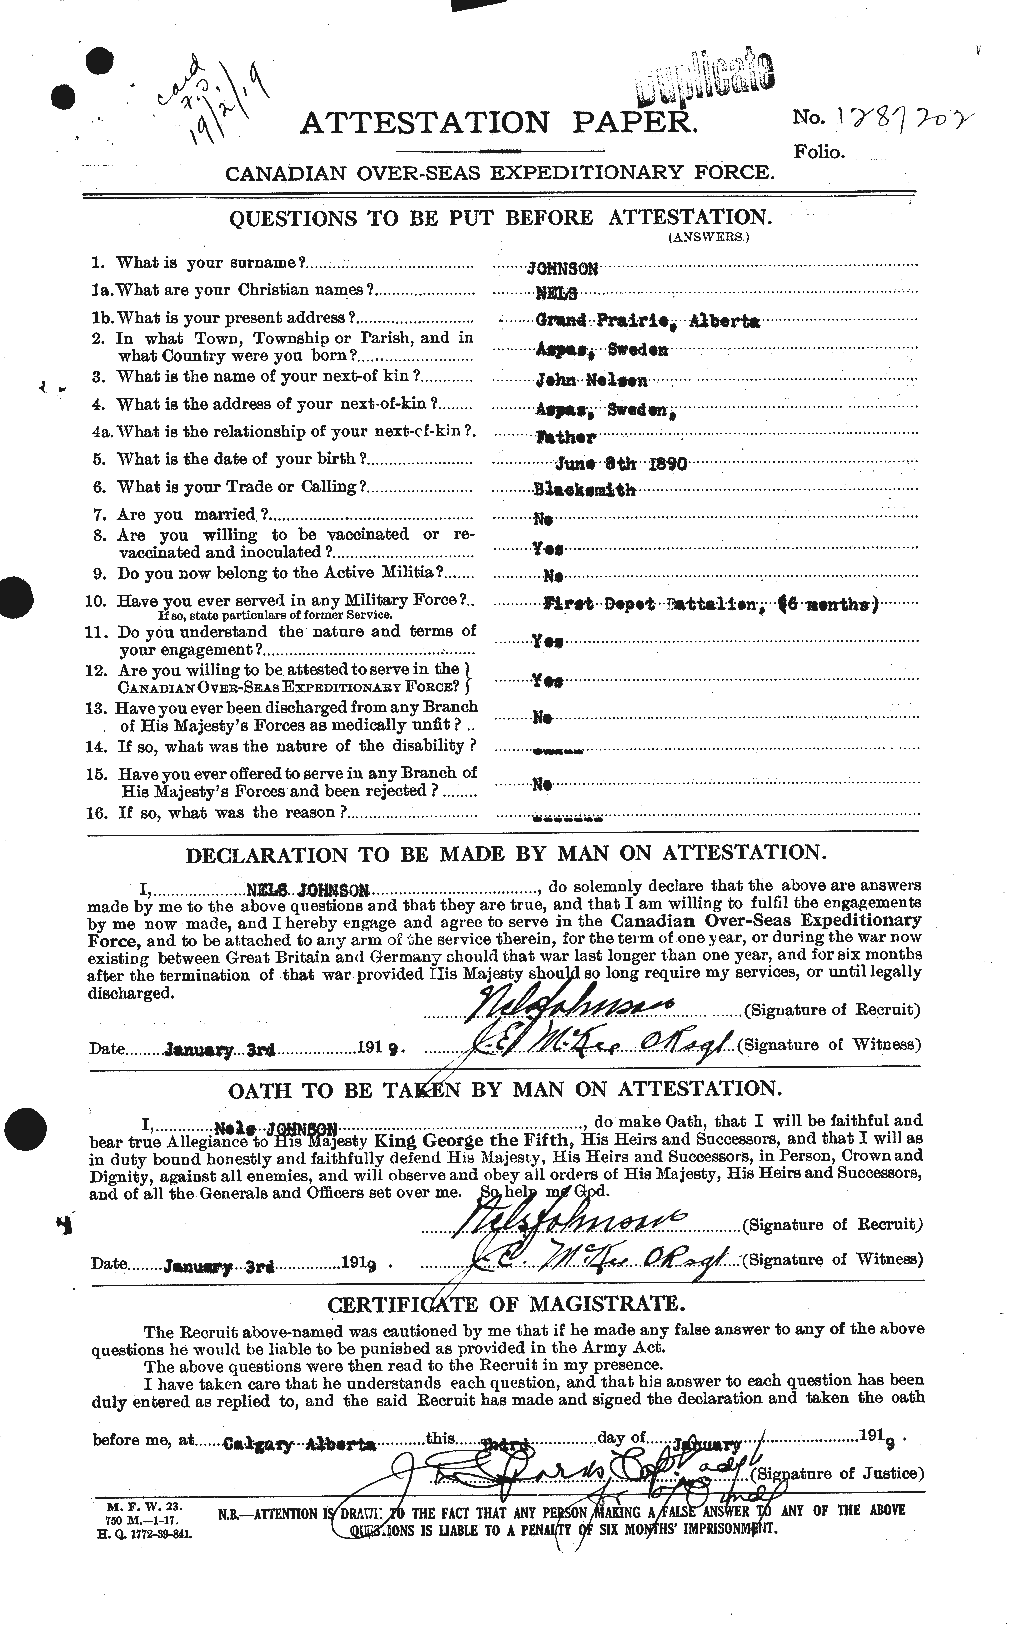 Personnel Records of the First World War - CEF 422158a